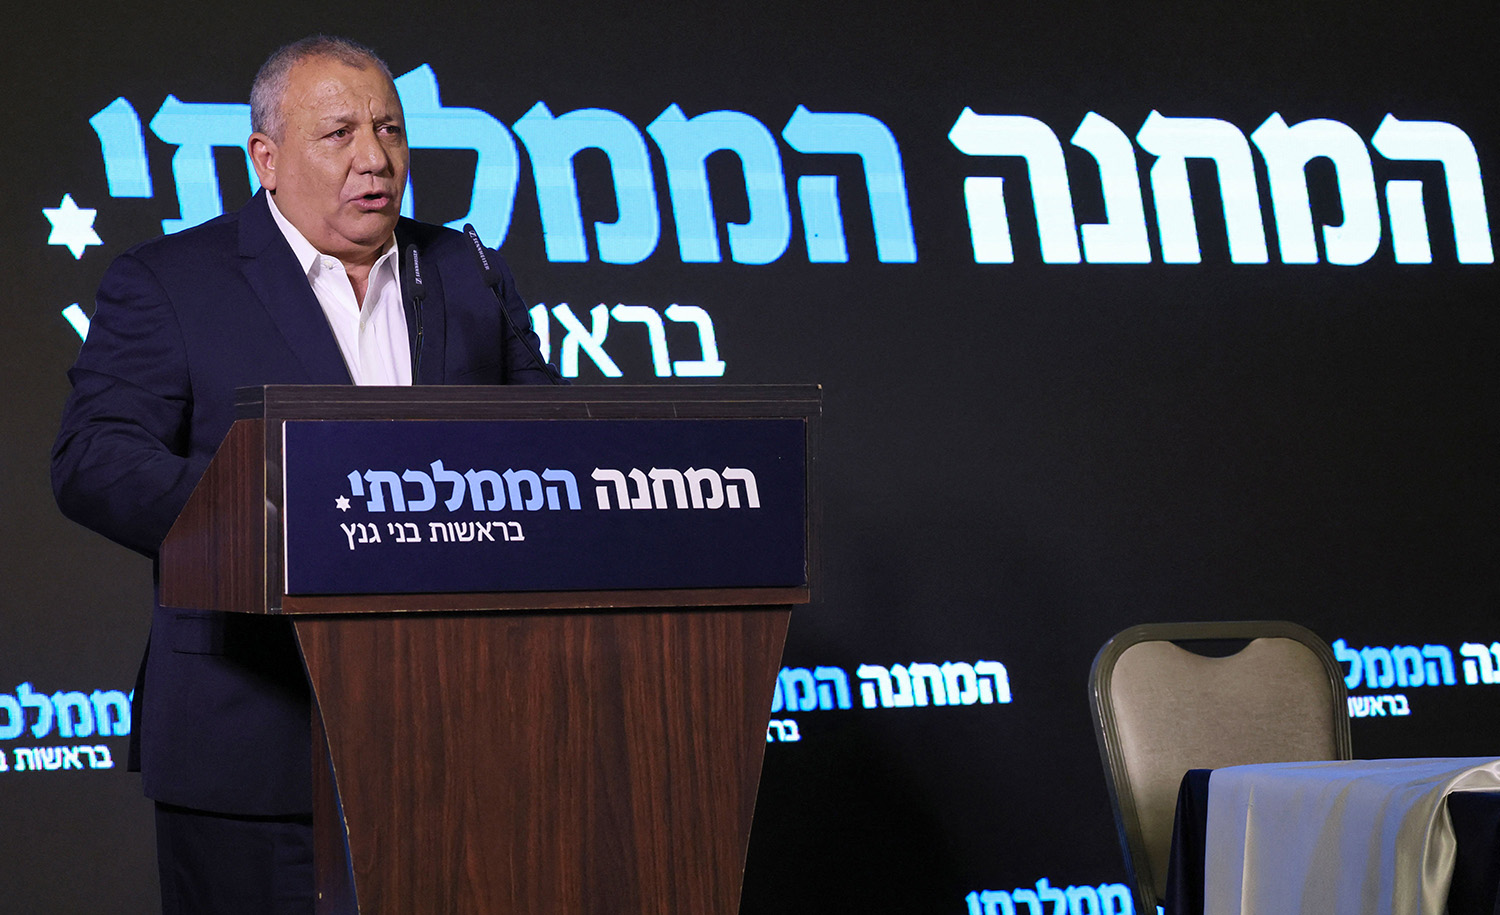 
Israel&#8217;s former army chief of staff Gadi Eisenkot speaks during a press conference to announce his new political party on August 14, 2022. JACK GUEZ/AFP via Getty Images.






